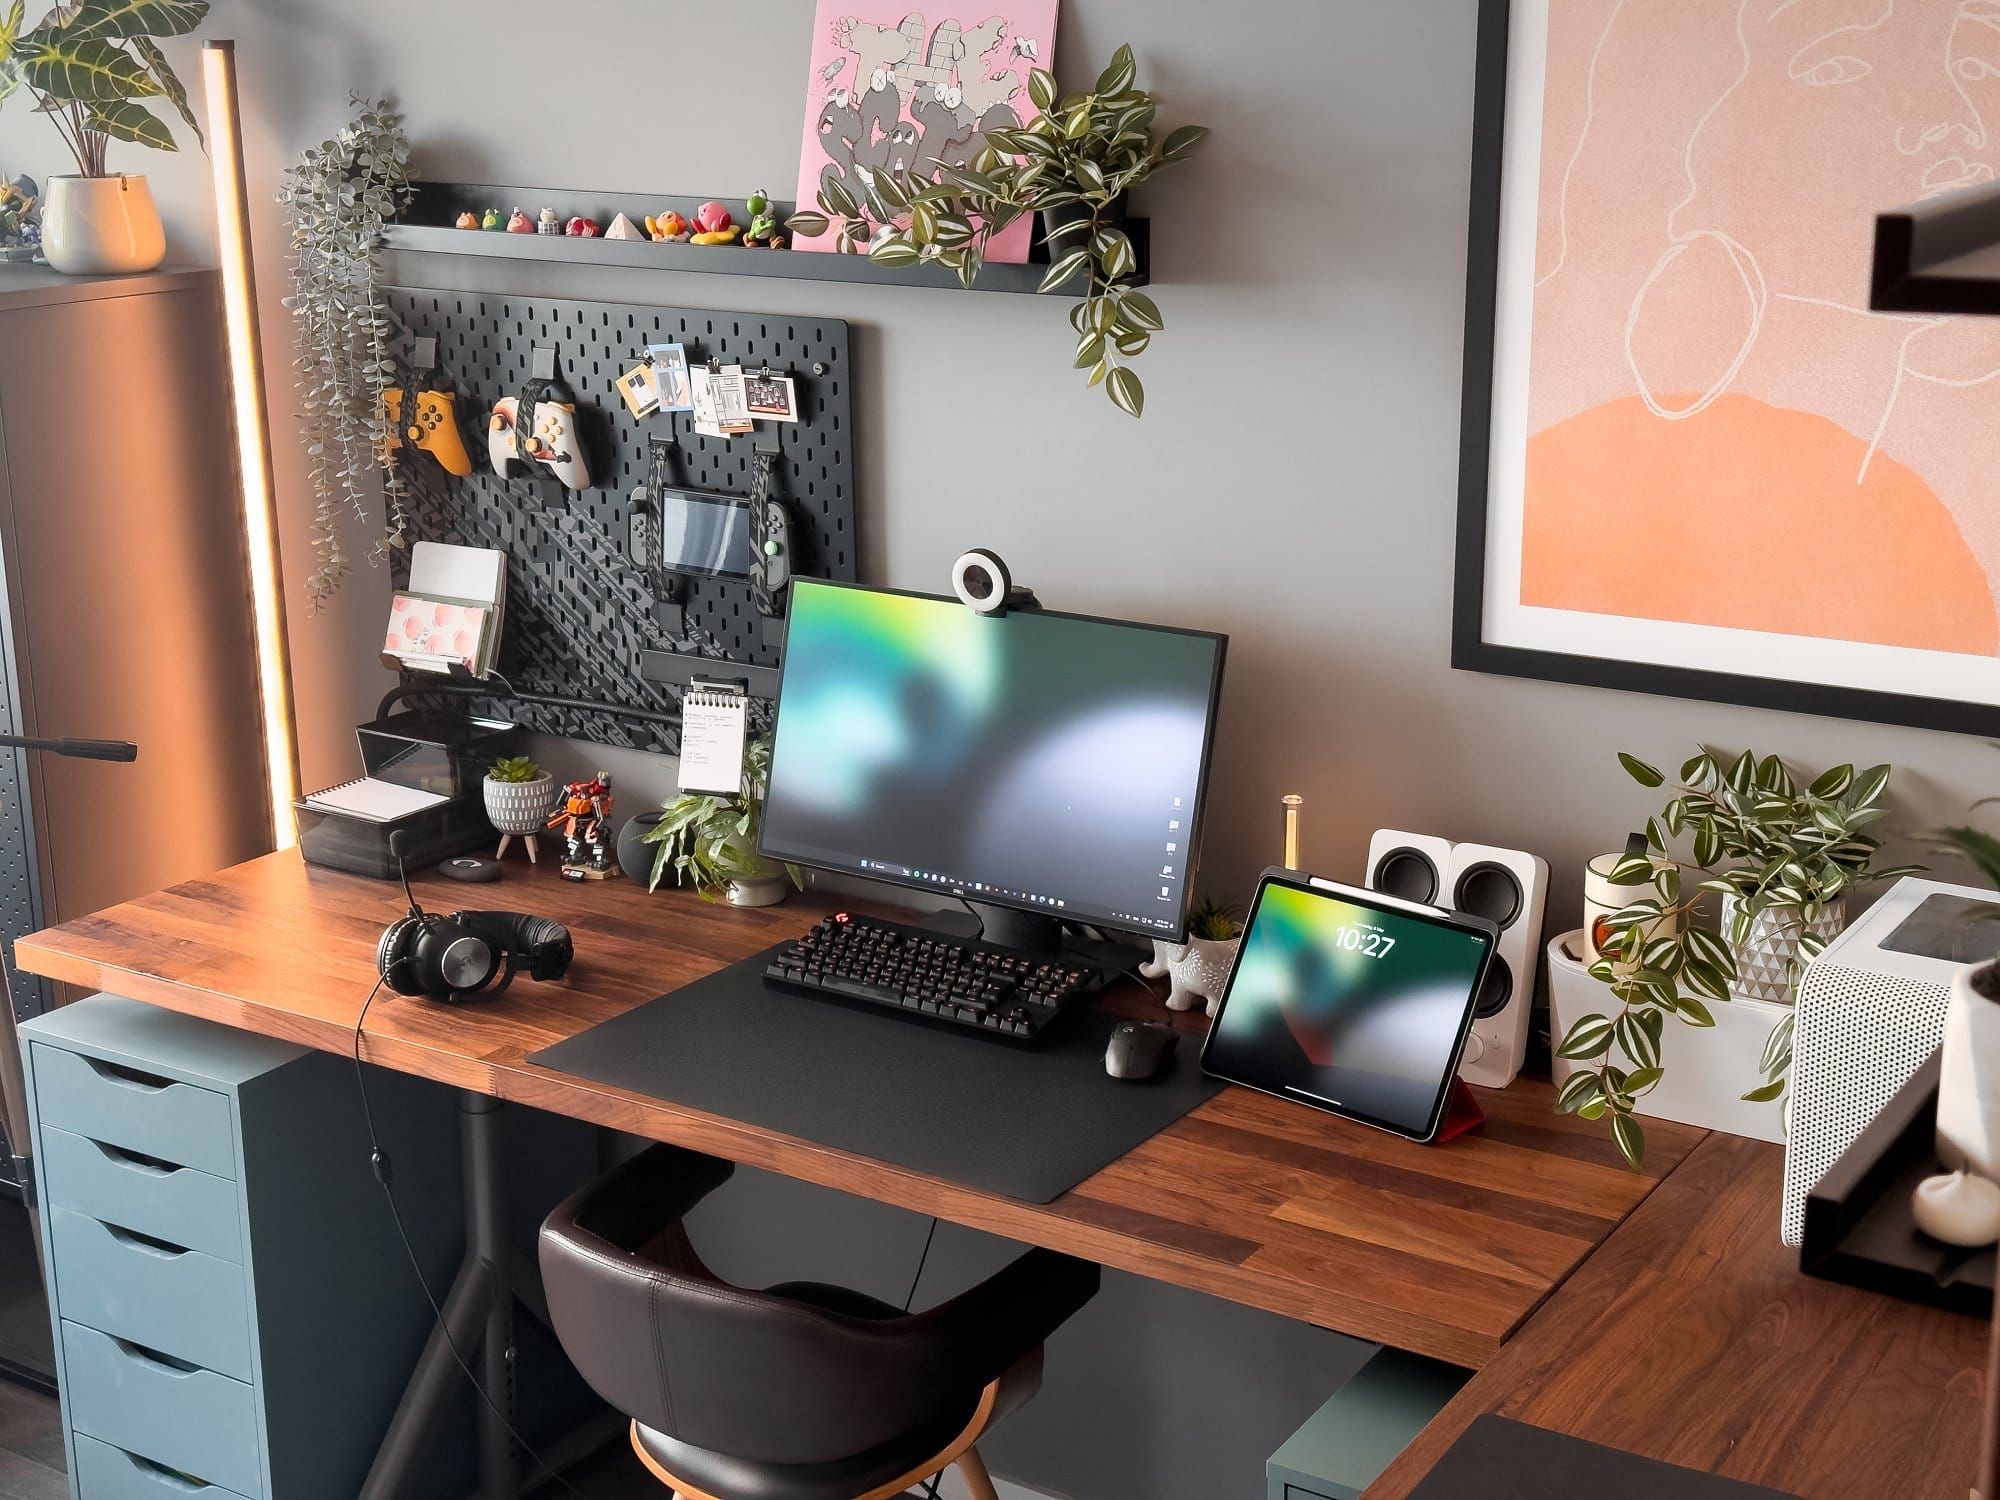 A modern and neatly arranged workspace featuring a Dell monitor with a Razer Kiyo webcam, Logitech G Pro keyboard and mouse, an iPad Pro 12.9 (3rd Gen), and Logitech G Pro X headphones on a wooden IKEA KARLBY desk with IKEA ALEX drawers, complemented by plants, framed artwork, and an IKEA UPPSPEL pegboard